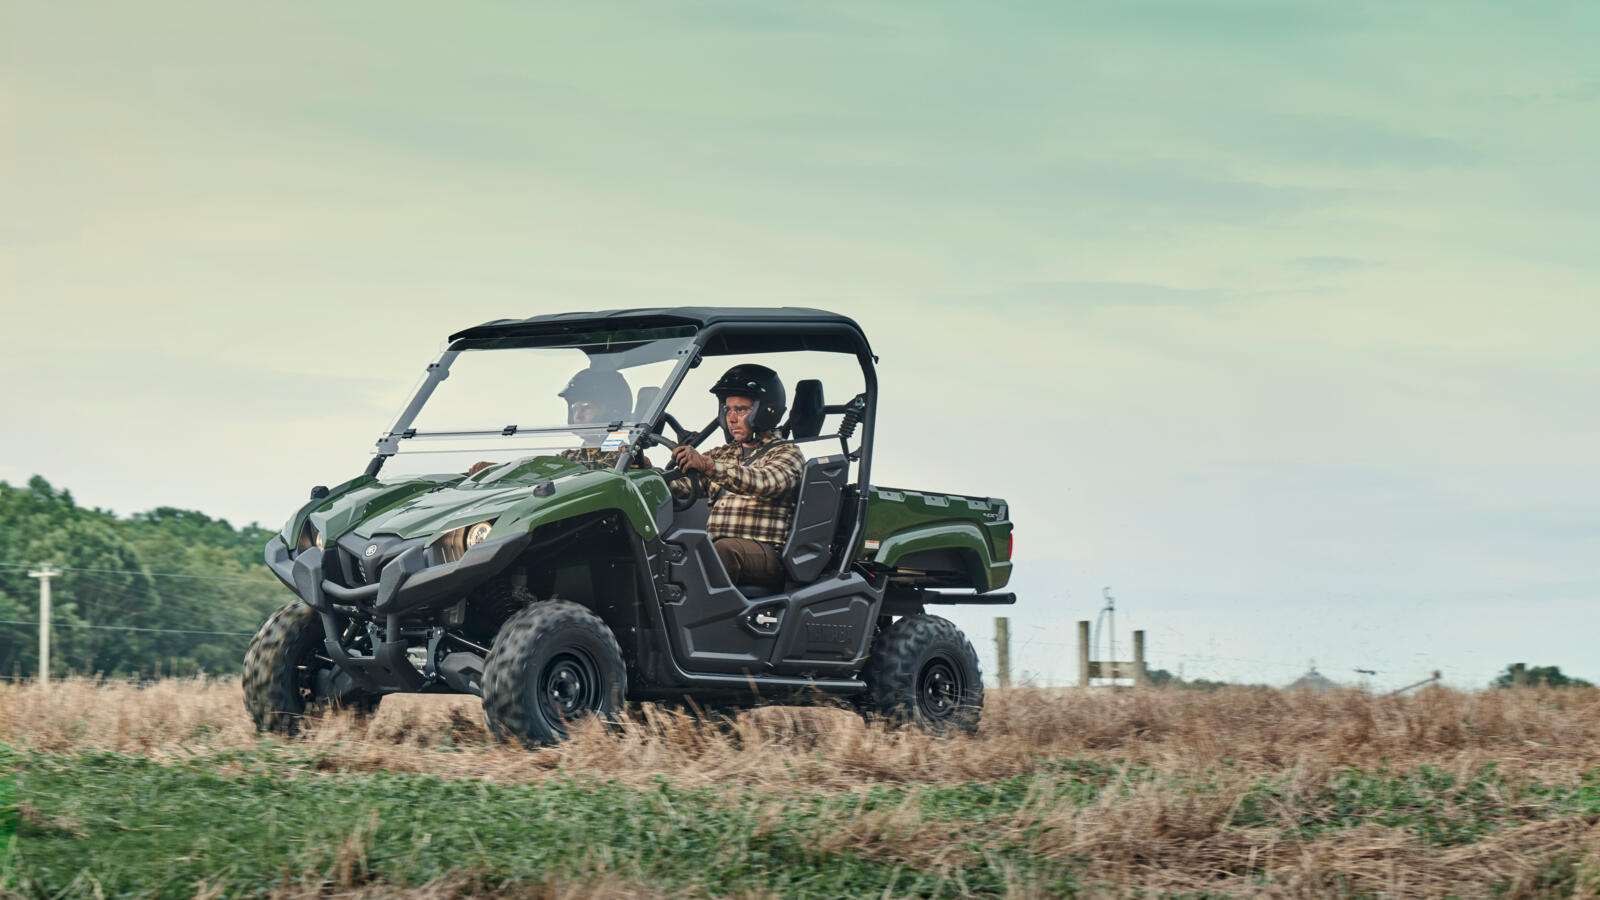 Yamaha Viking side by side offroad ATV  similar to the one used in self-driving off-road vehicle testing 